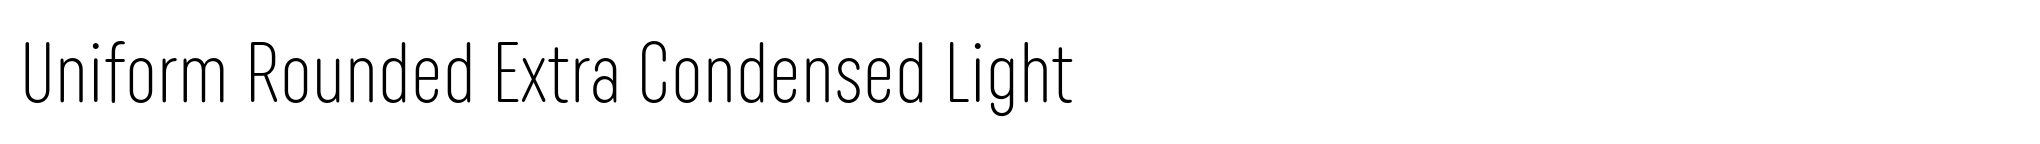 Uniform Rounded Extra Condensed Light image